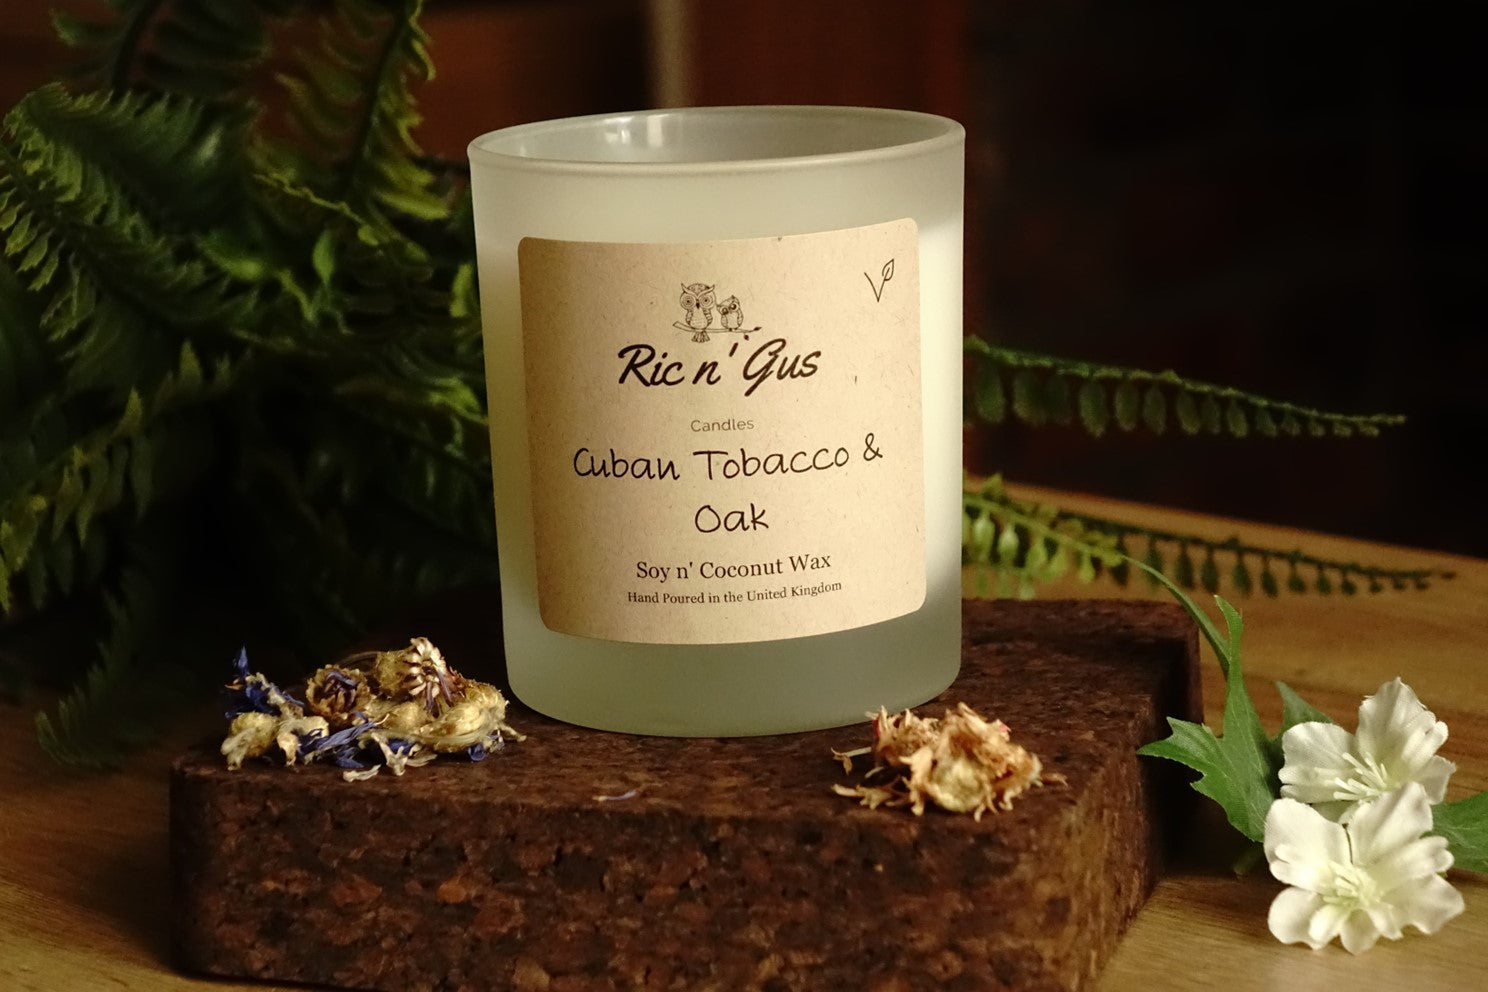 Tobacco & Oak Candle - Soy and Coconut Wax Ric n'Gus Candles